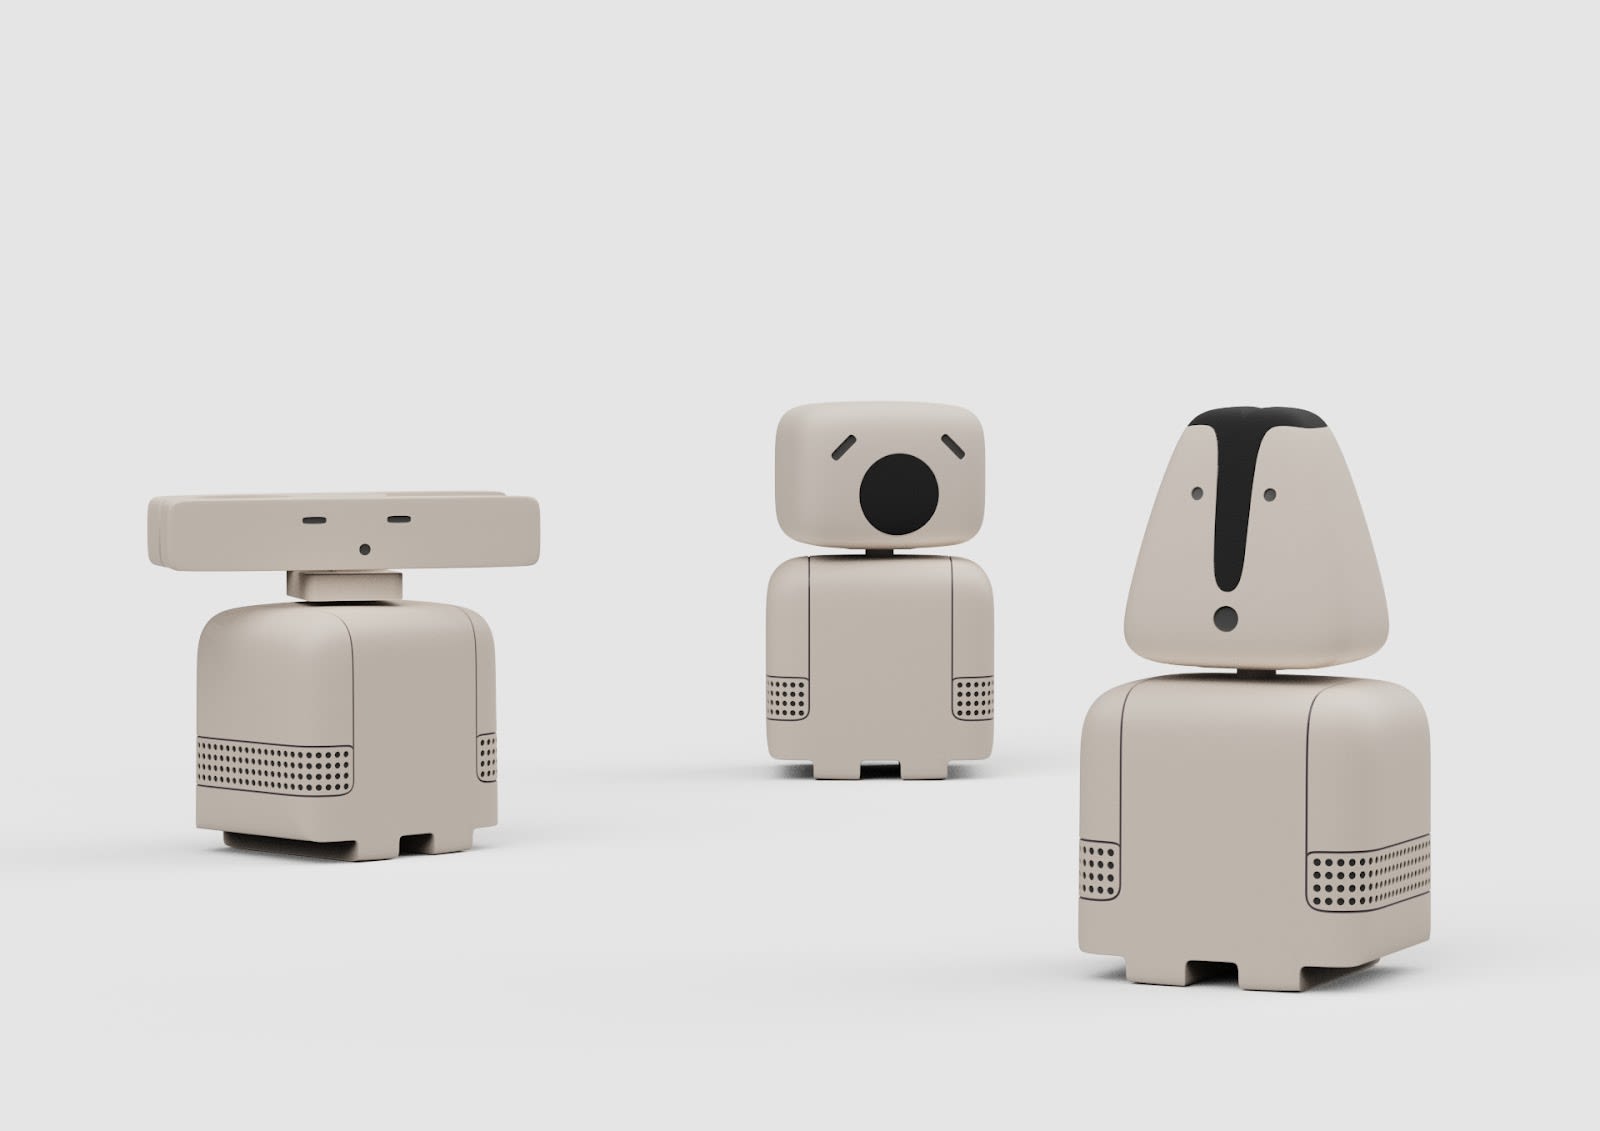 Three small robots with human like expressions